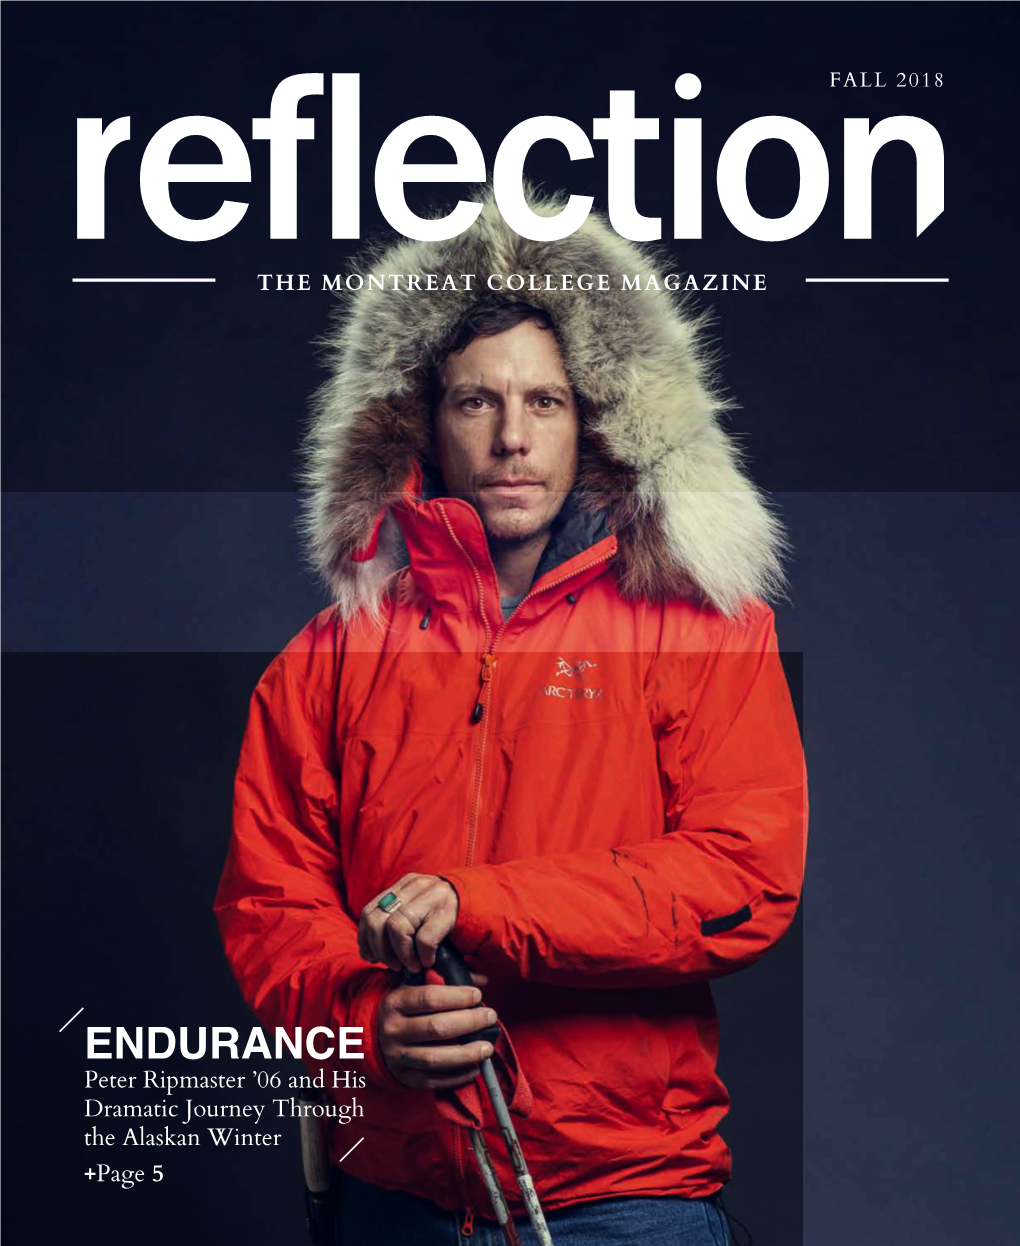 ENDURANCE Peter Ripmaster ’06 and His Dramatic Journey Through the Alaskan Winter +Page 5 in This ISSUE